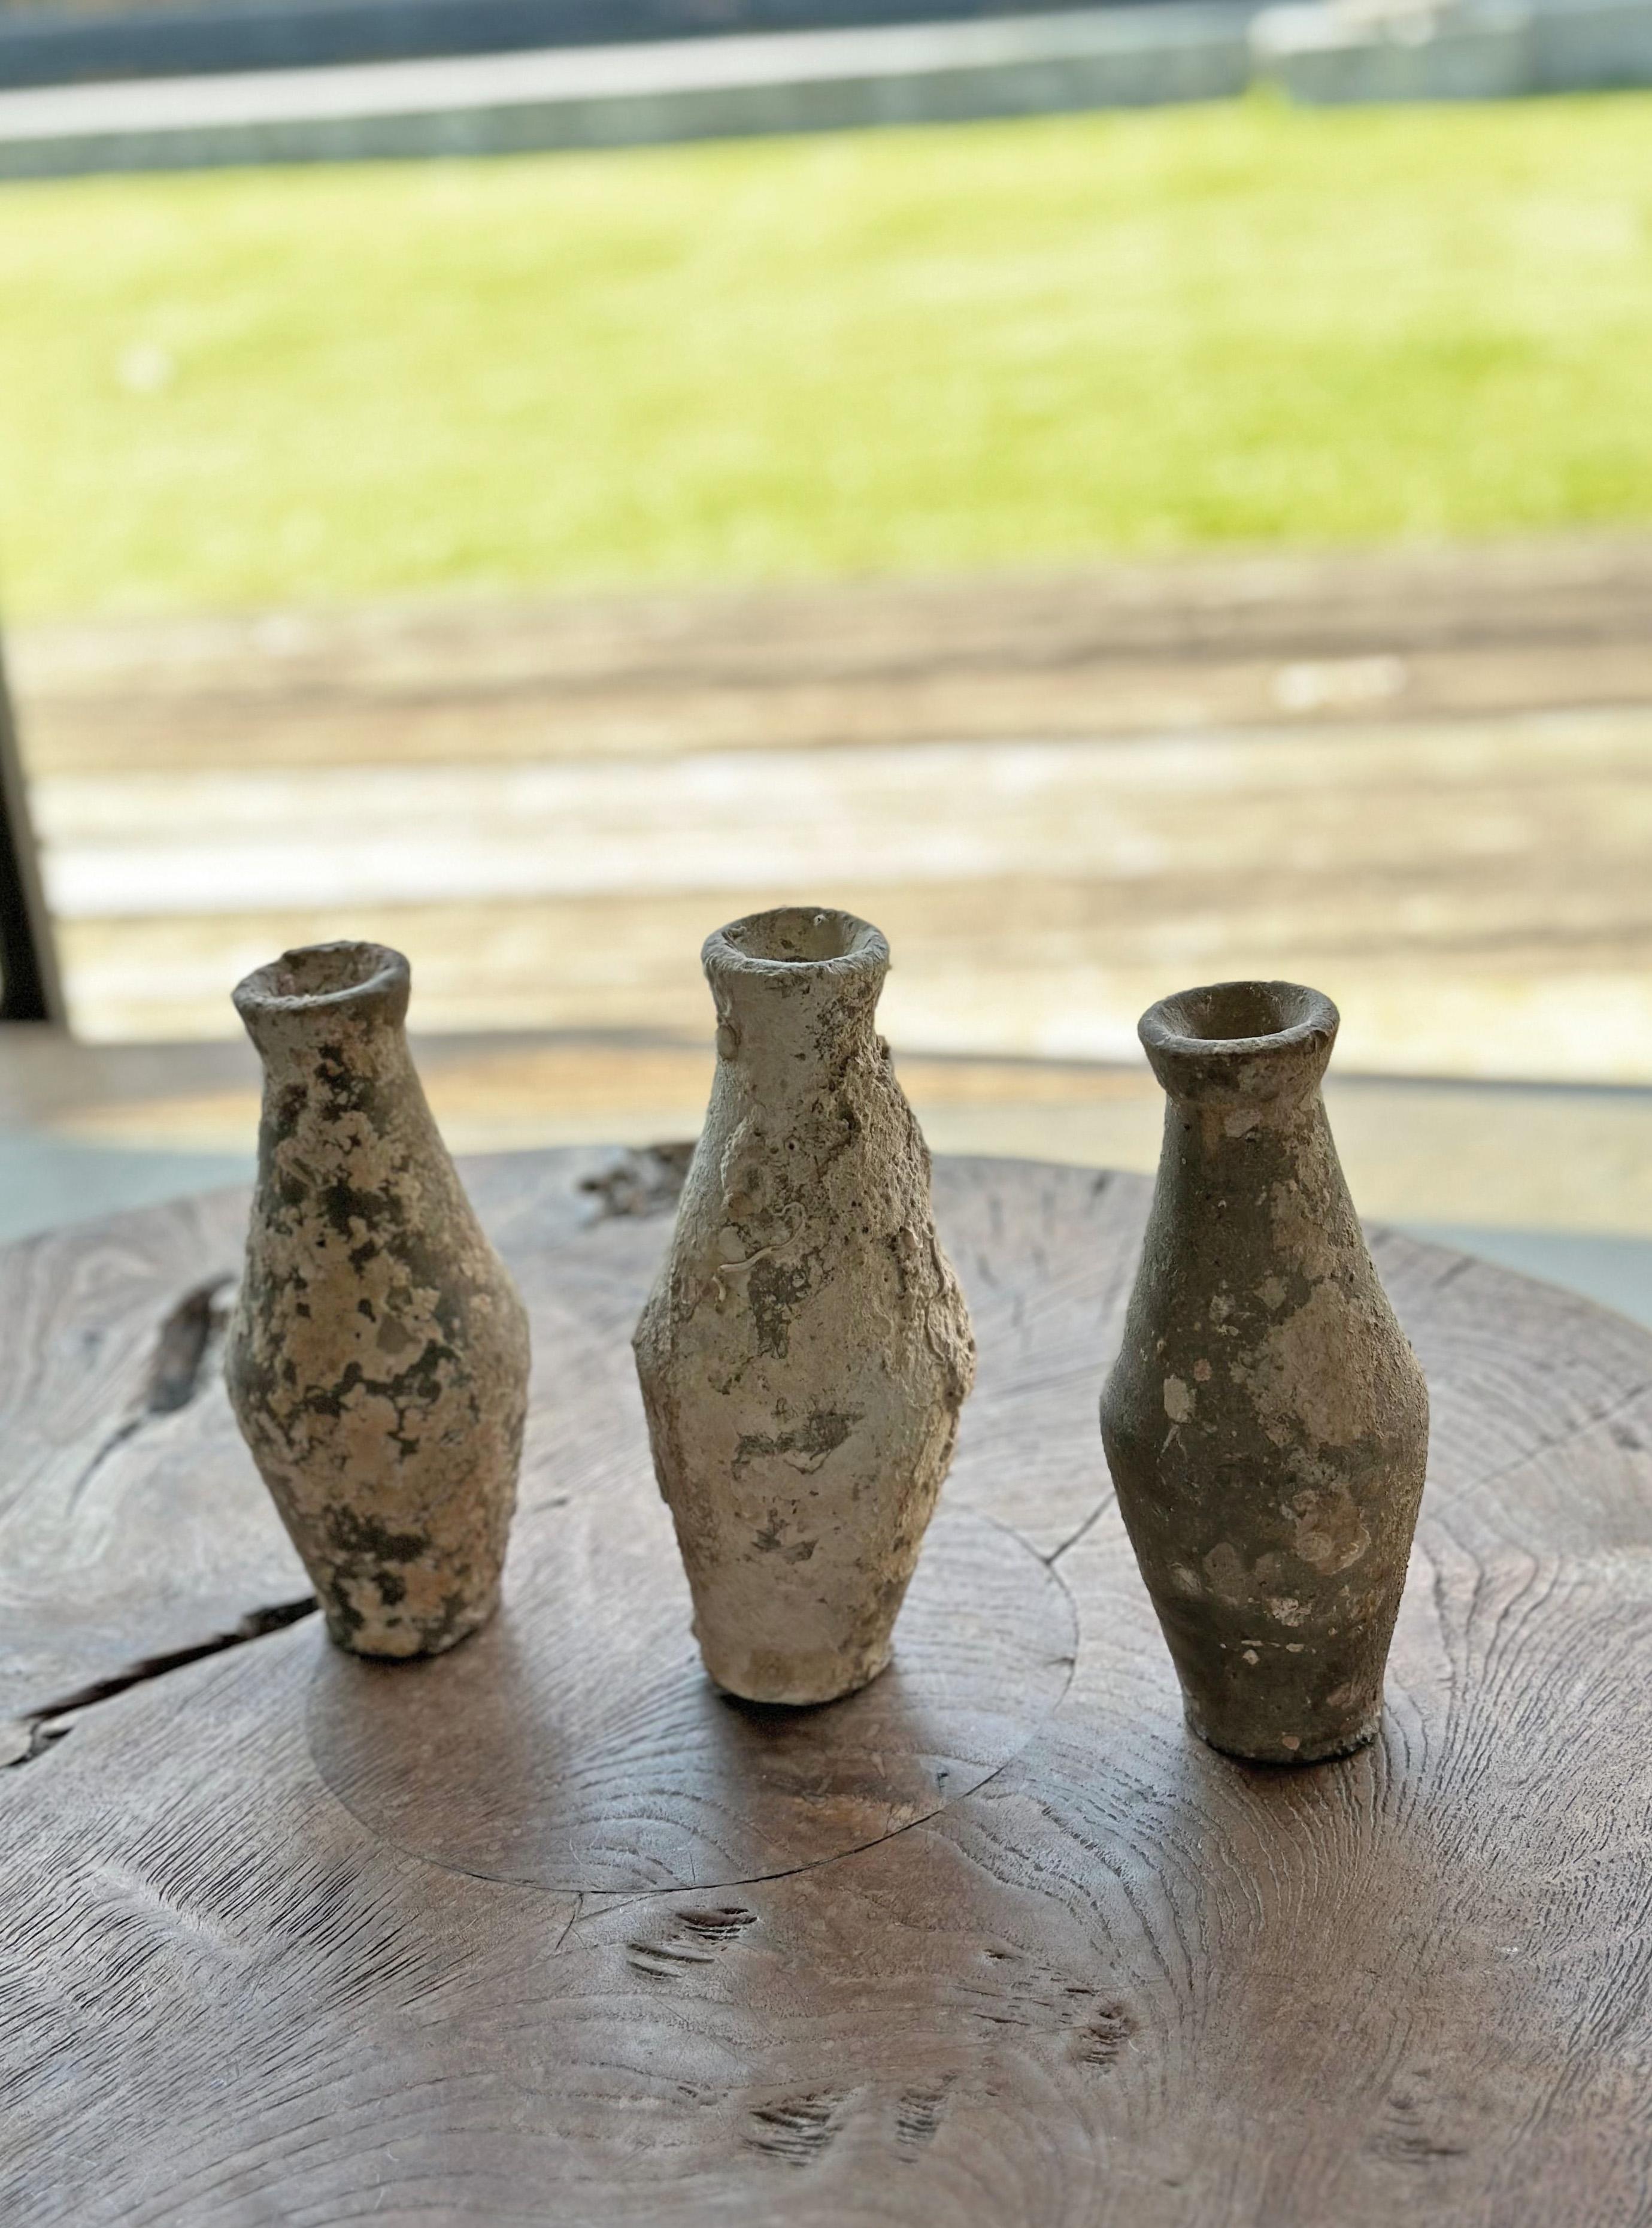 A set of 3 shipwreck bottles from a Shipwreck off the Coast of the Indonesian Island of Batam. Batam was one of the most substantial and influential ports in the South China Sea where an abundance of trade was conducted. This set of bottles feature